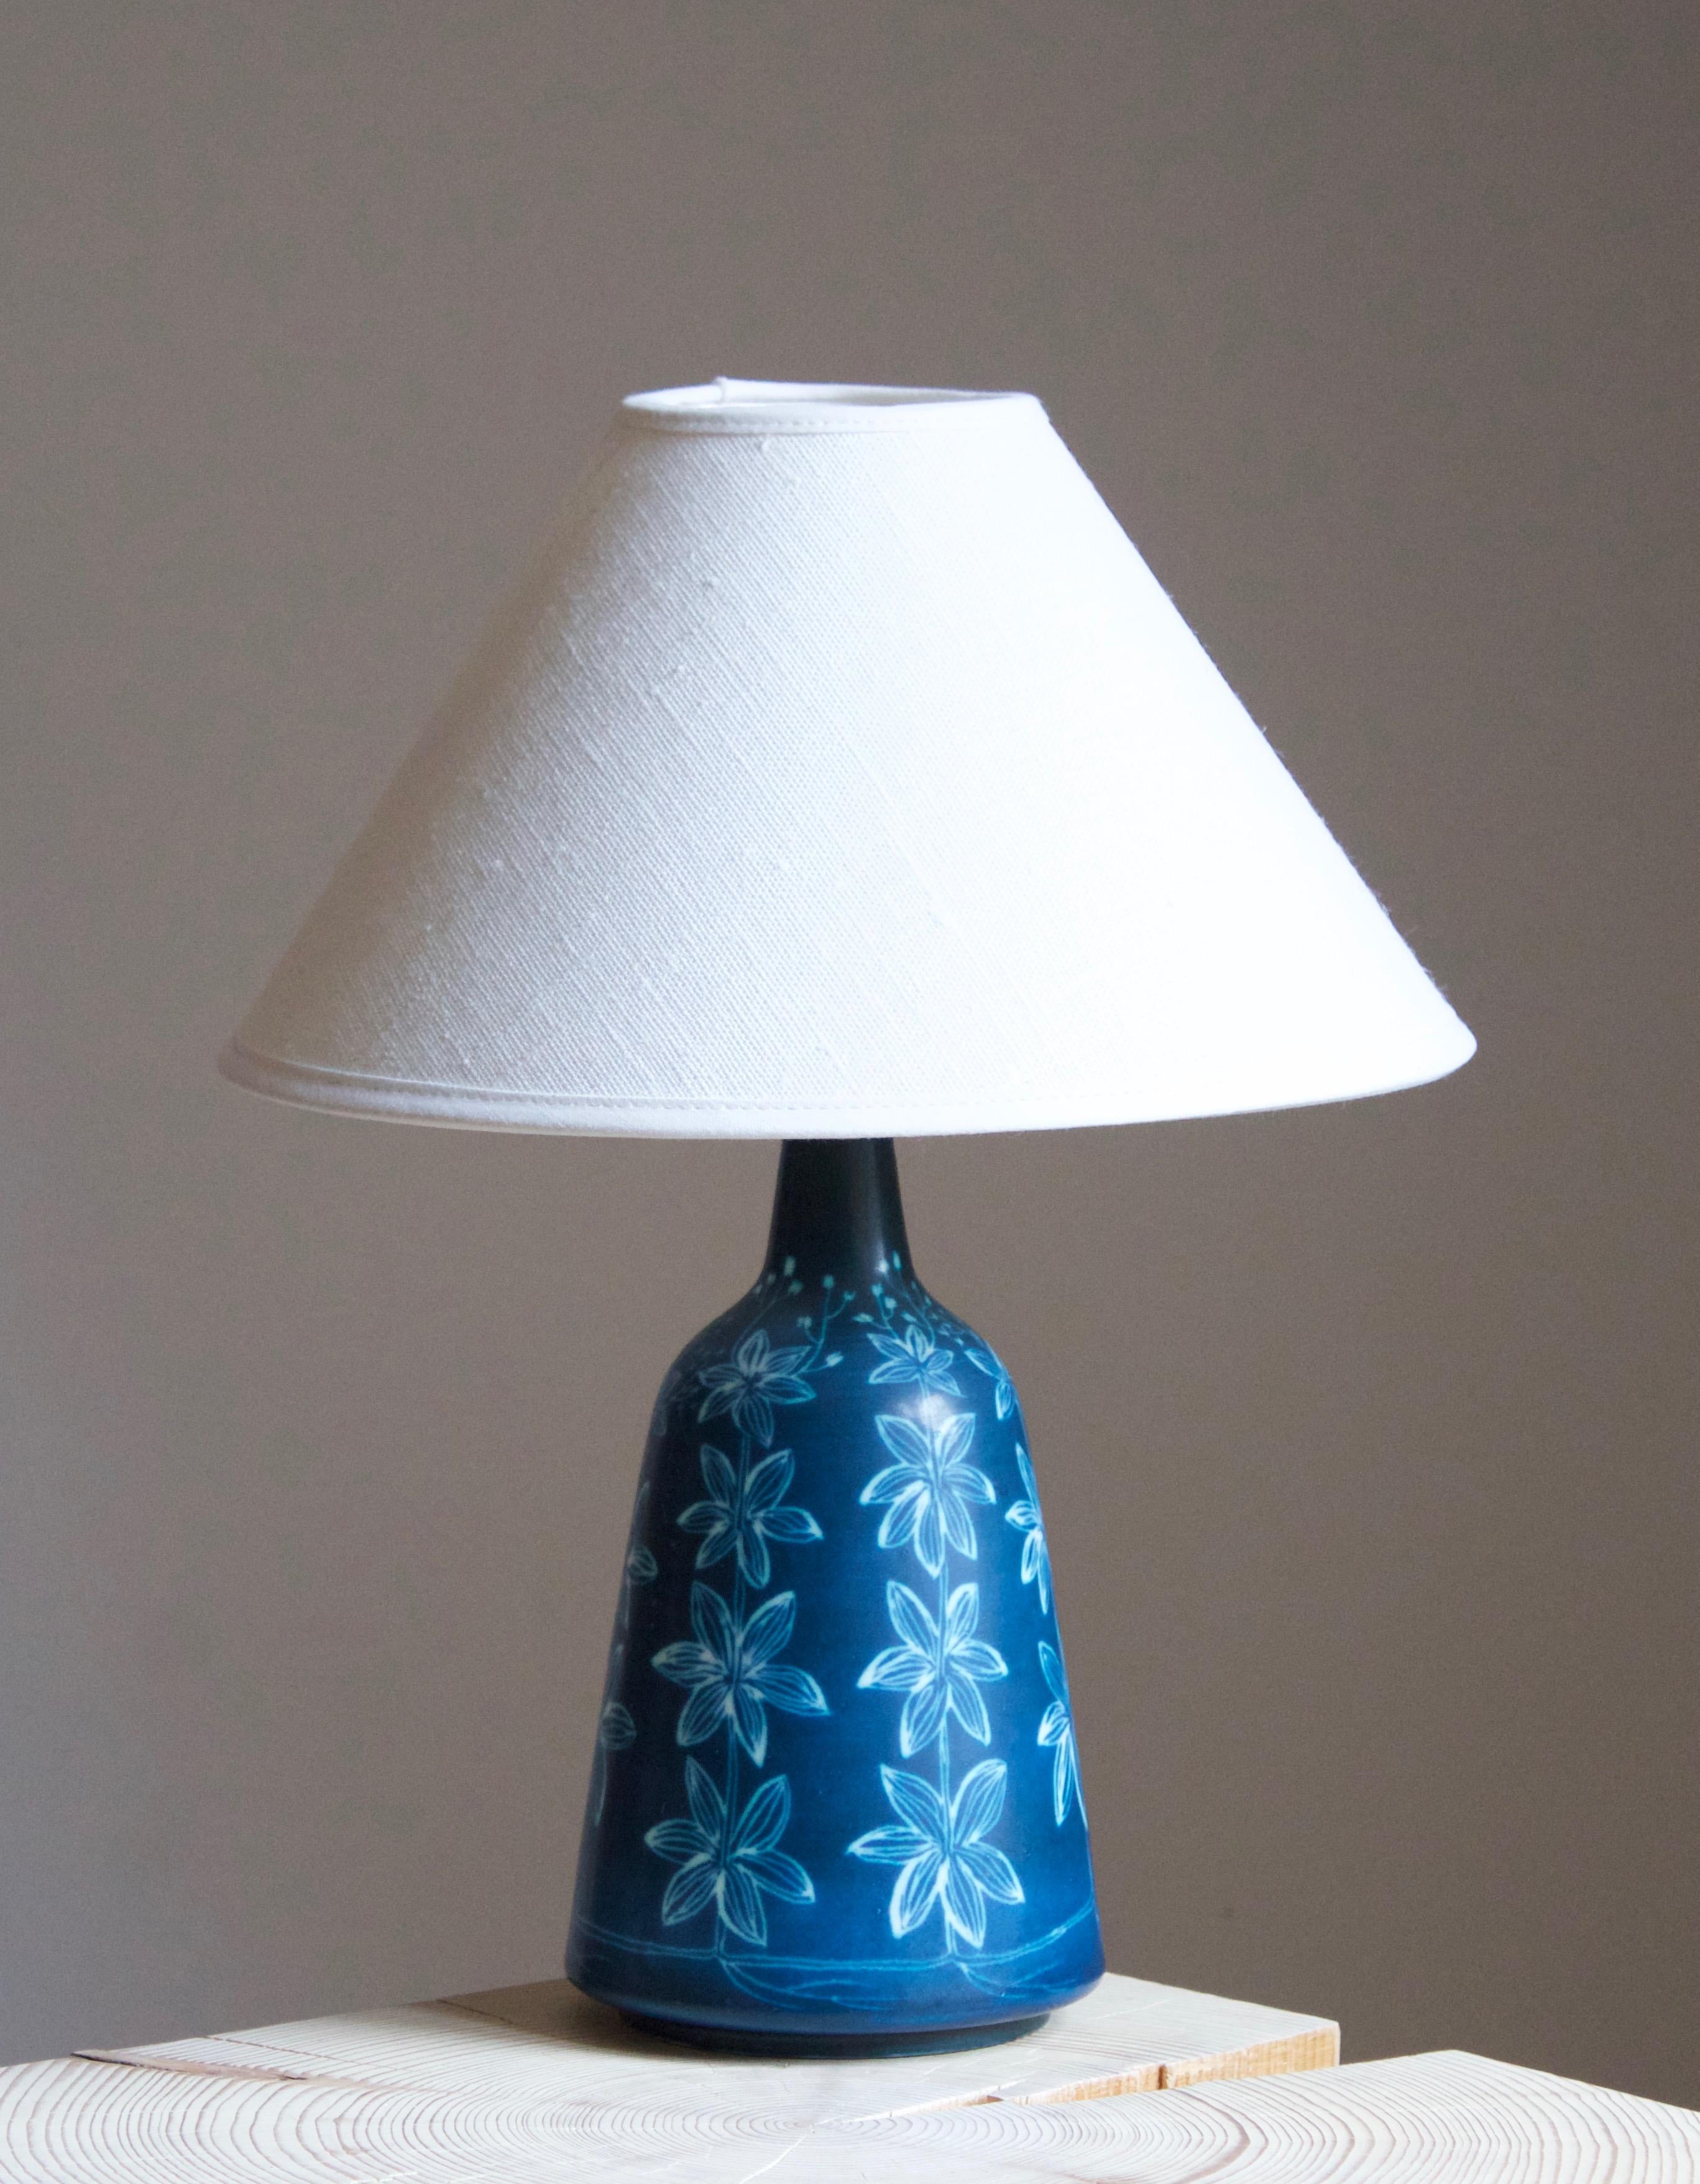 A table lamp produced by Rörstrand, Sweden, 1950. Designed by Hertha Bengtsson, (Swedish, 1914-1997). Signed.

Stated dimensions excluding lampshade. Height includes socket. Sold without lampshade.

Other ceramicists of the period include Axel